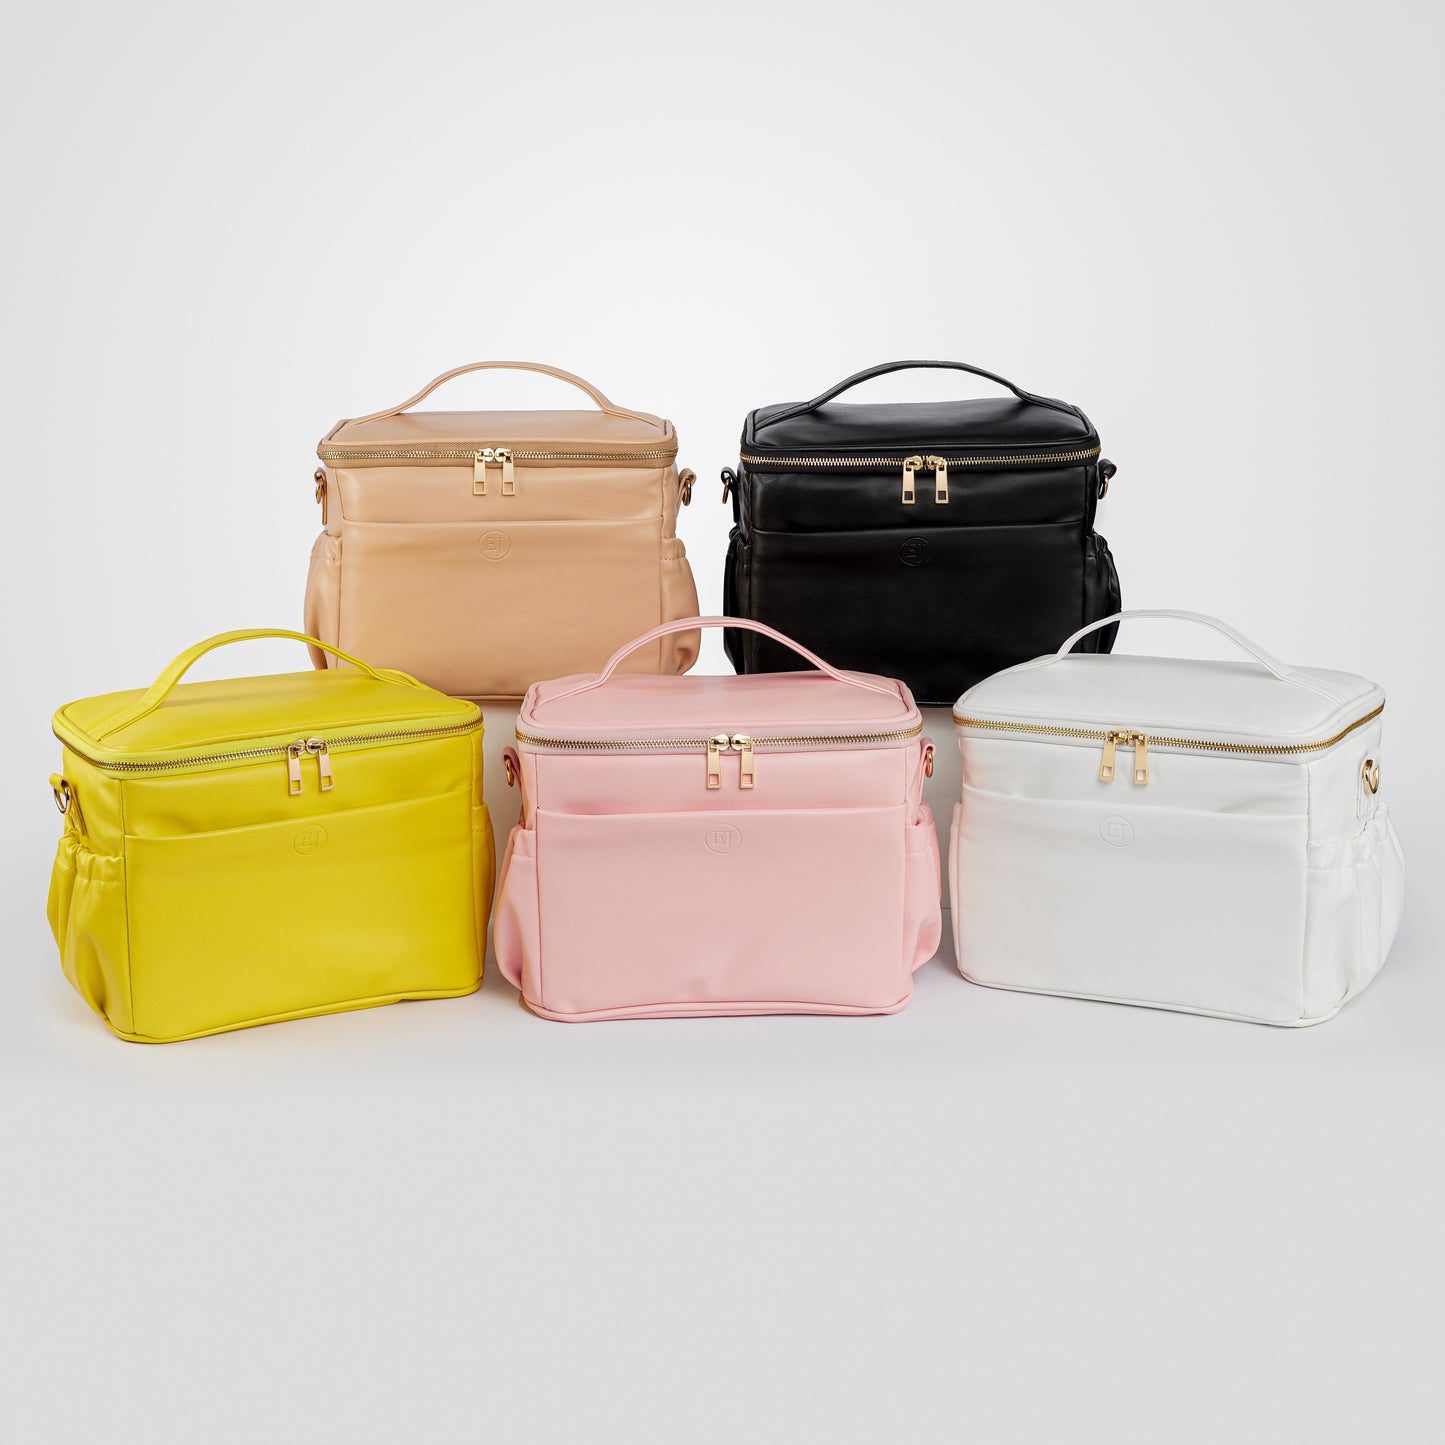 leather lunch bag in black, beige, yellow, pink and white colour